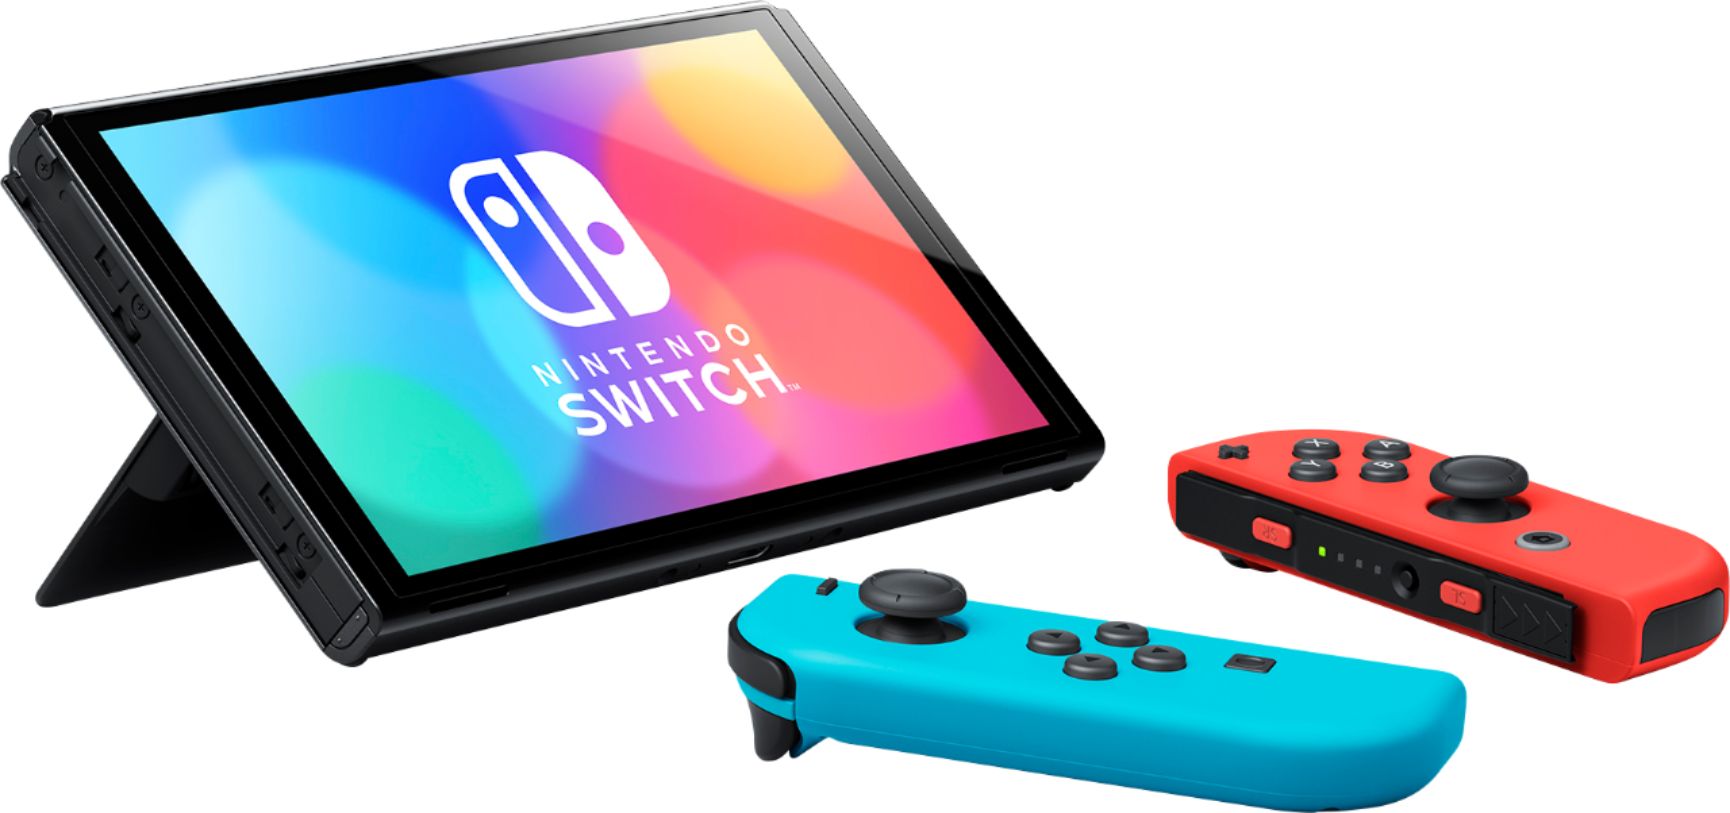 2021 New Nintendo Switch OLED Model Neon Red Blue with Mytrix Full Body Skin for NS OLED Console, Dock and Joycons - Sakura Pink